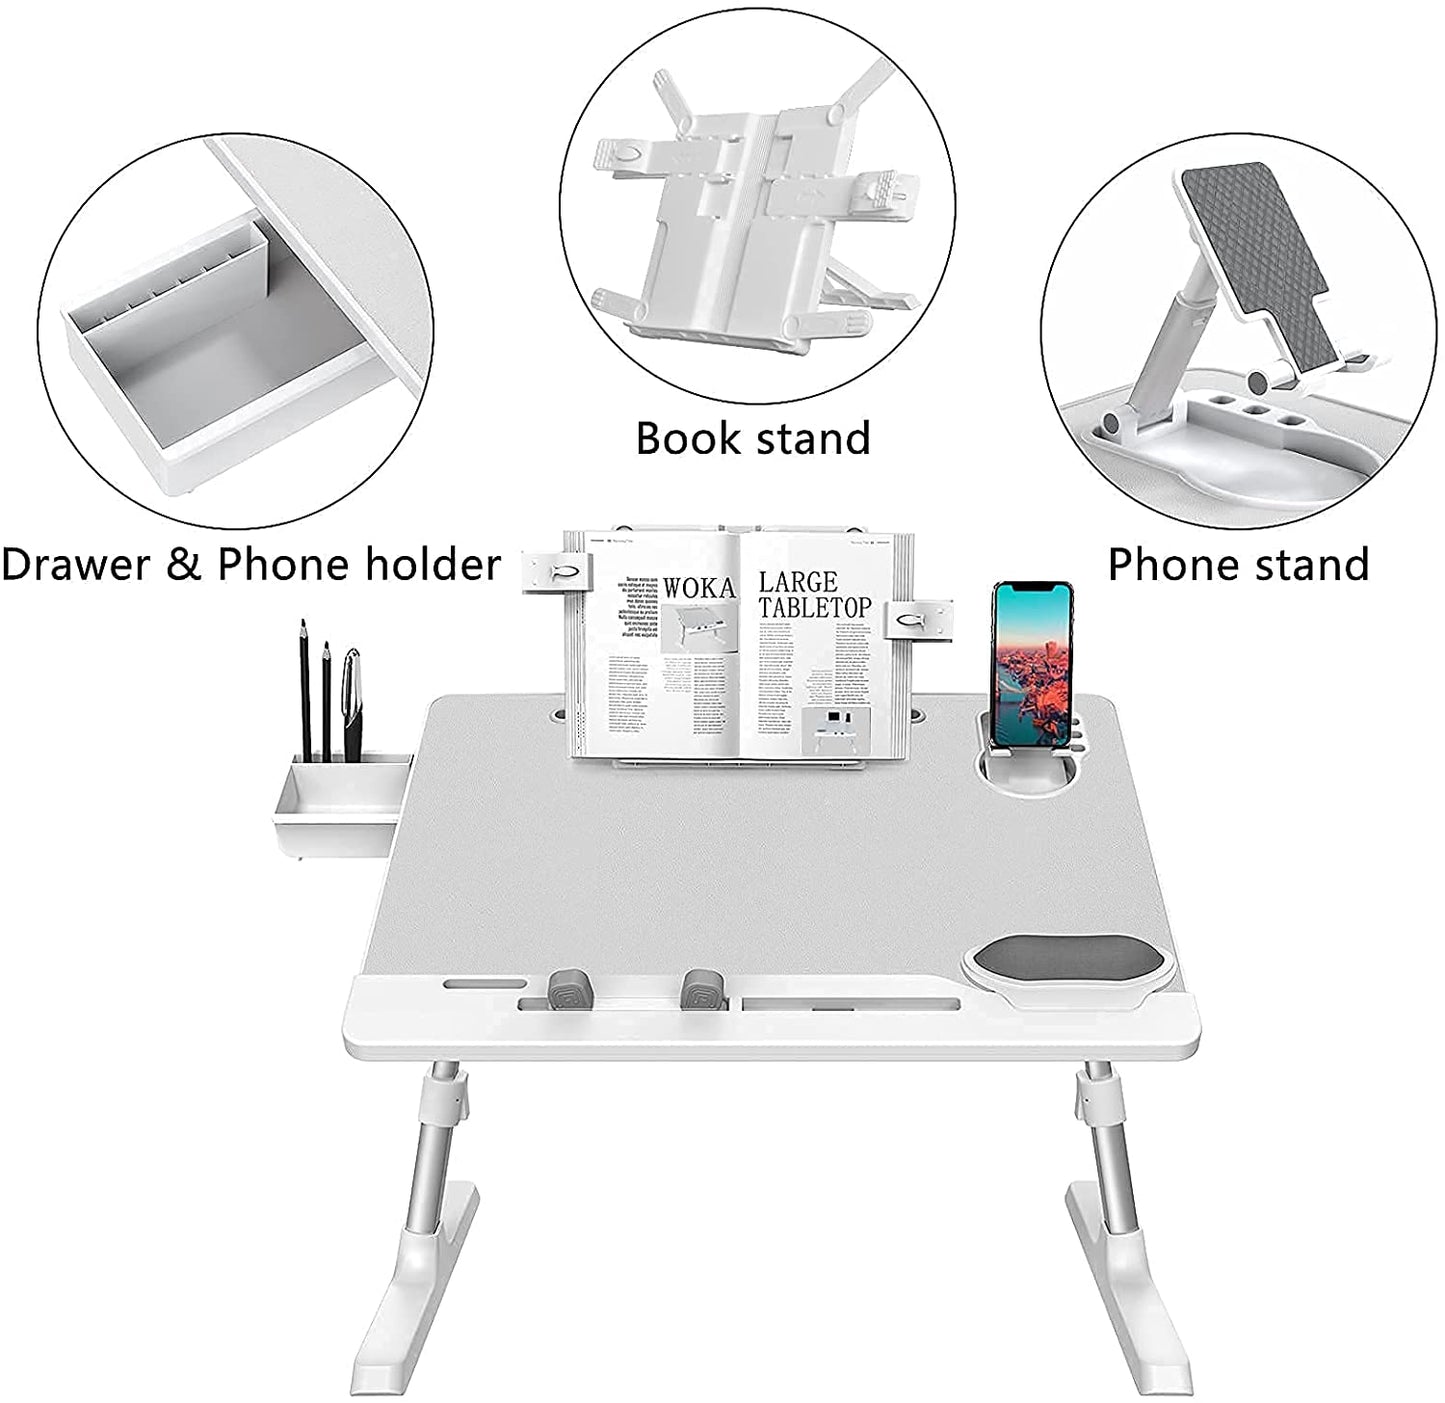 Gray laptop bed desk with phone stand, book stand, and drawer